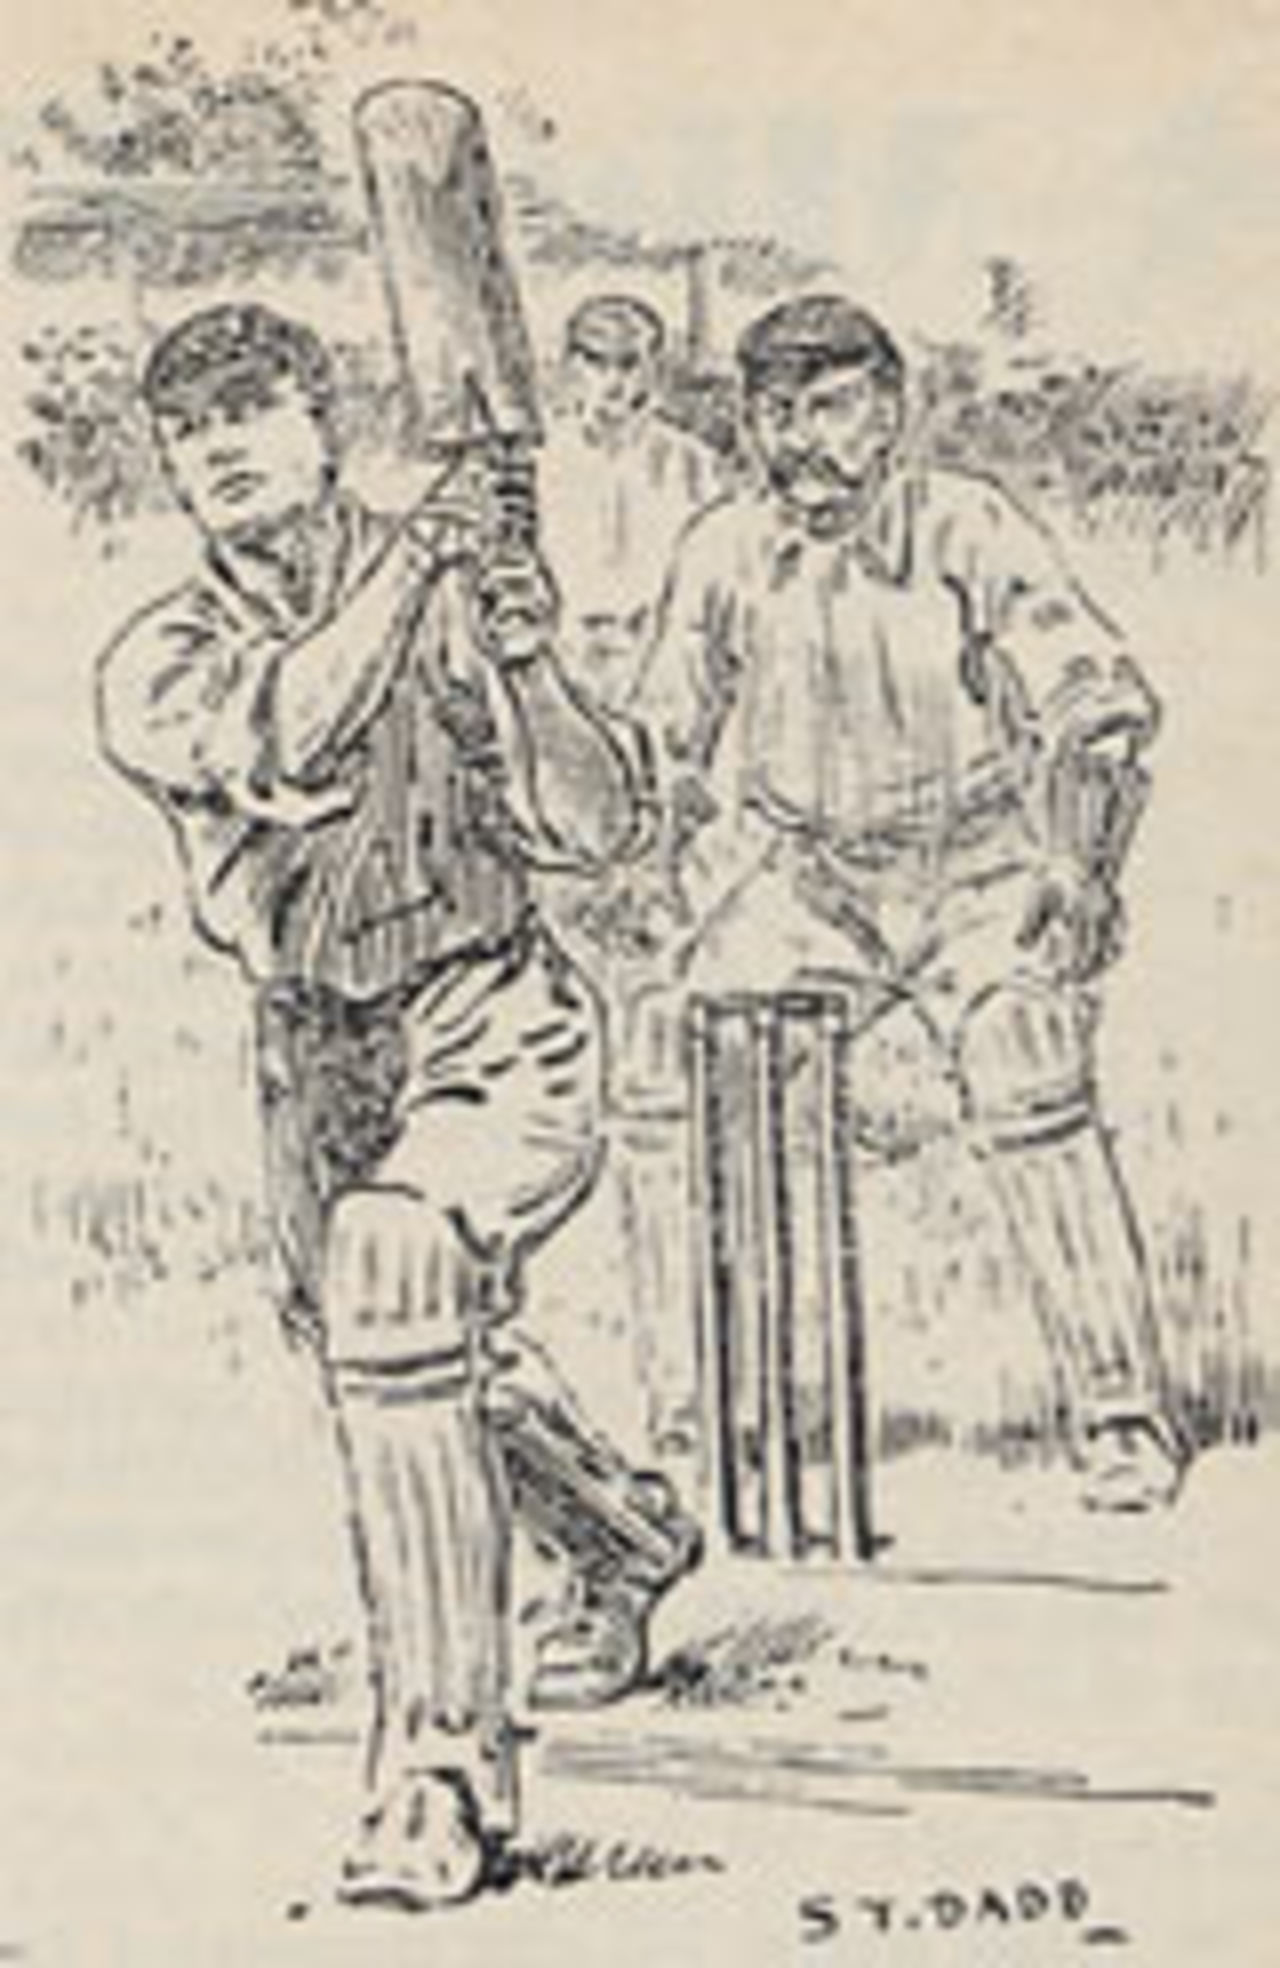 Gilbert Jessop lofts Hugh Trumble into the pavilion during his hundred at The Oval against Australia in 1902. The sketches, by S.T. Dadd, appeared in <I>The Daily Graphic</I>